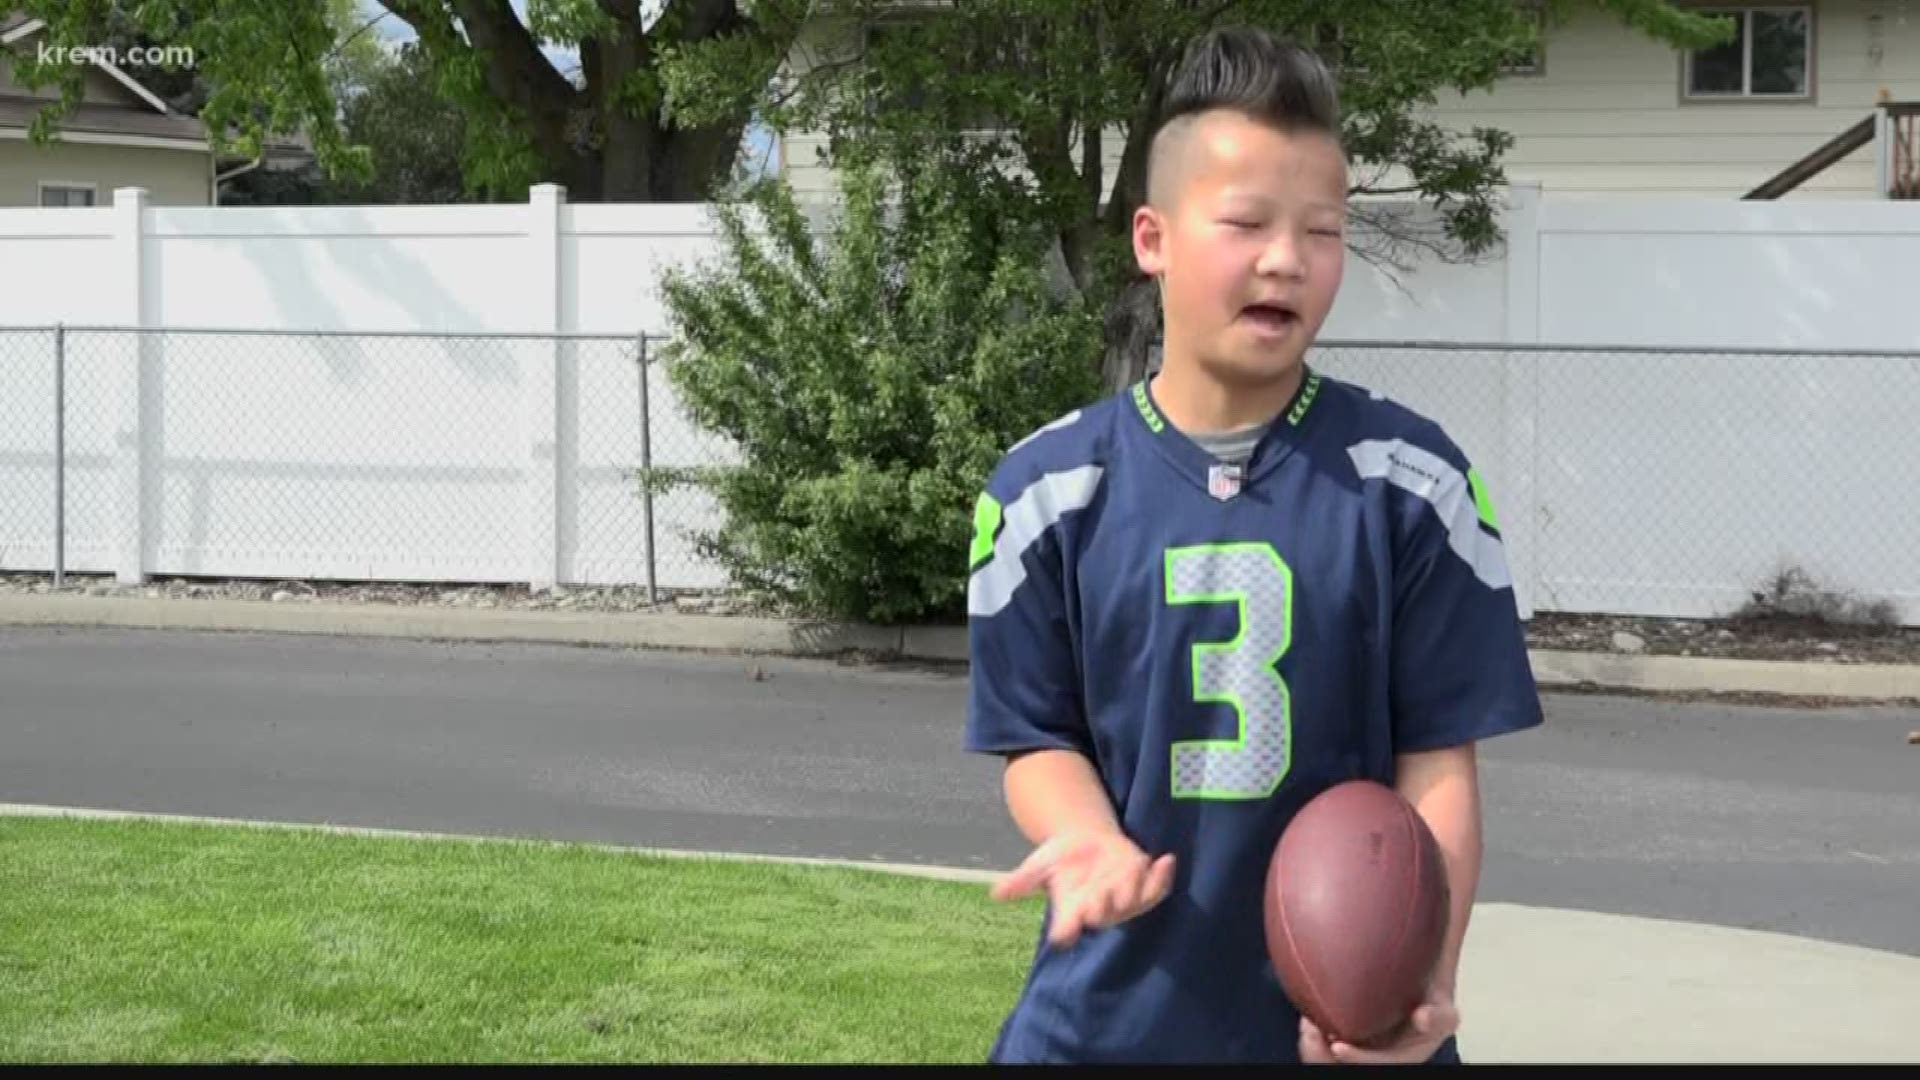 Mike Lucas, 14, is missing the lower portion of both of his legs but he has big football dreams. He is a diehard Seahawks fan and this season he will be watching even closer because of Griffin.